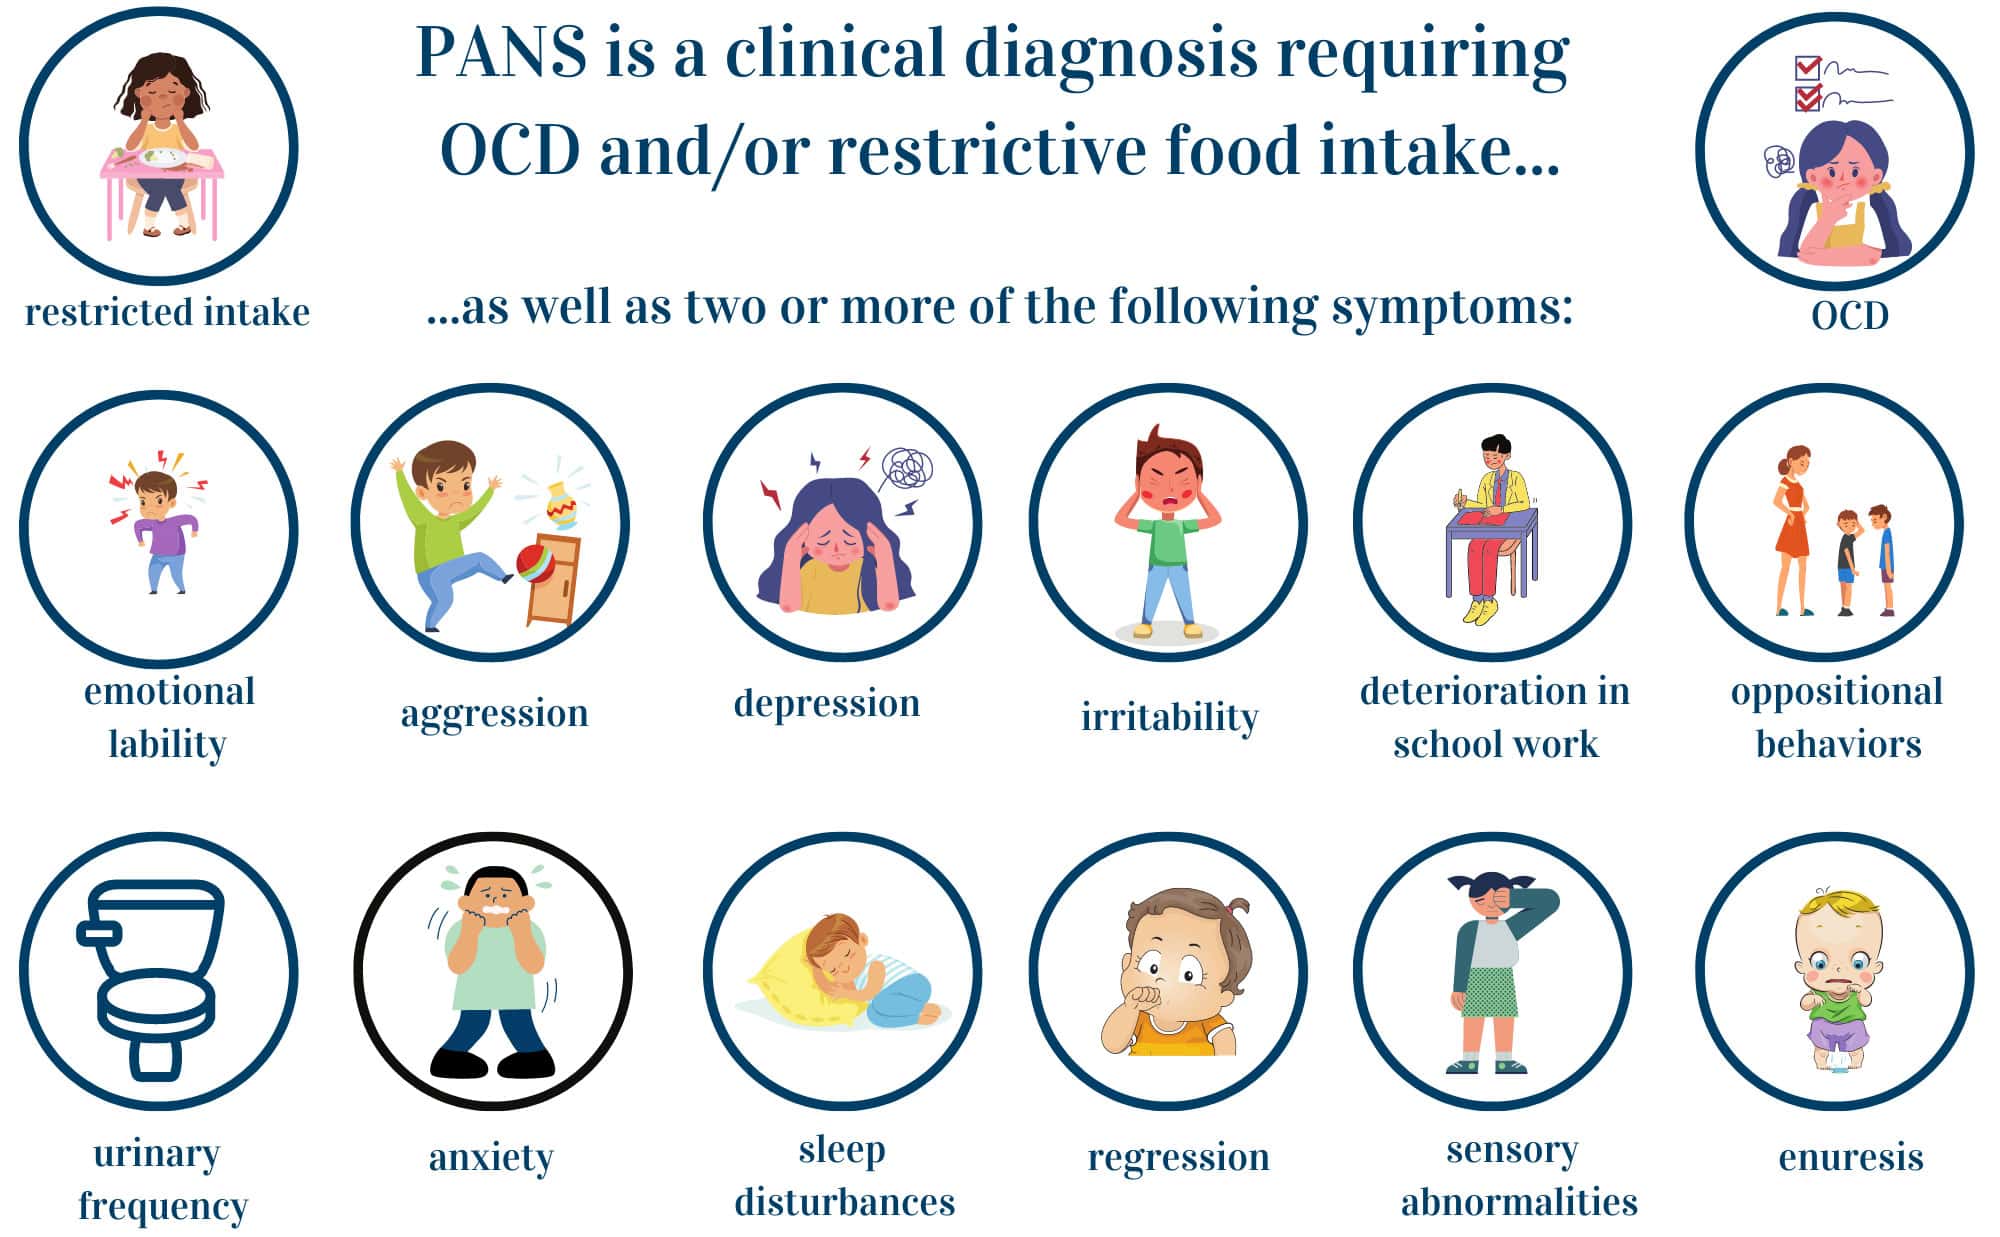 A heading appears above an list of symptoms, with cartoon illustrations of each: PANS is a clinical diagnosis requiring OCD and/or restrictive food intake, as well as two or more of the following symptoms: emotional lability, aggression, depression, irritability, deterioration in schoolwork, oppositional behaviors, urinary frequency, anxiety, sleep disturbances, regression, sensory abnormalities, and enuresis. neuroimmune.org.